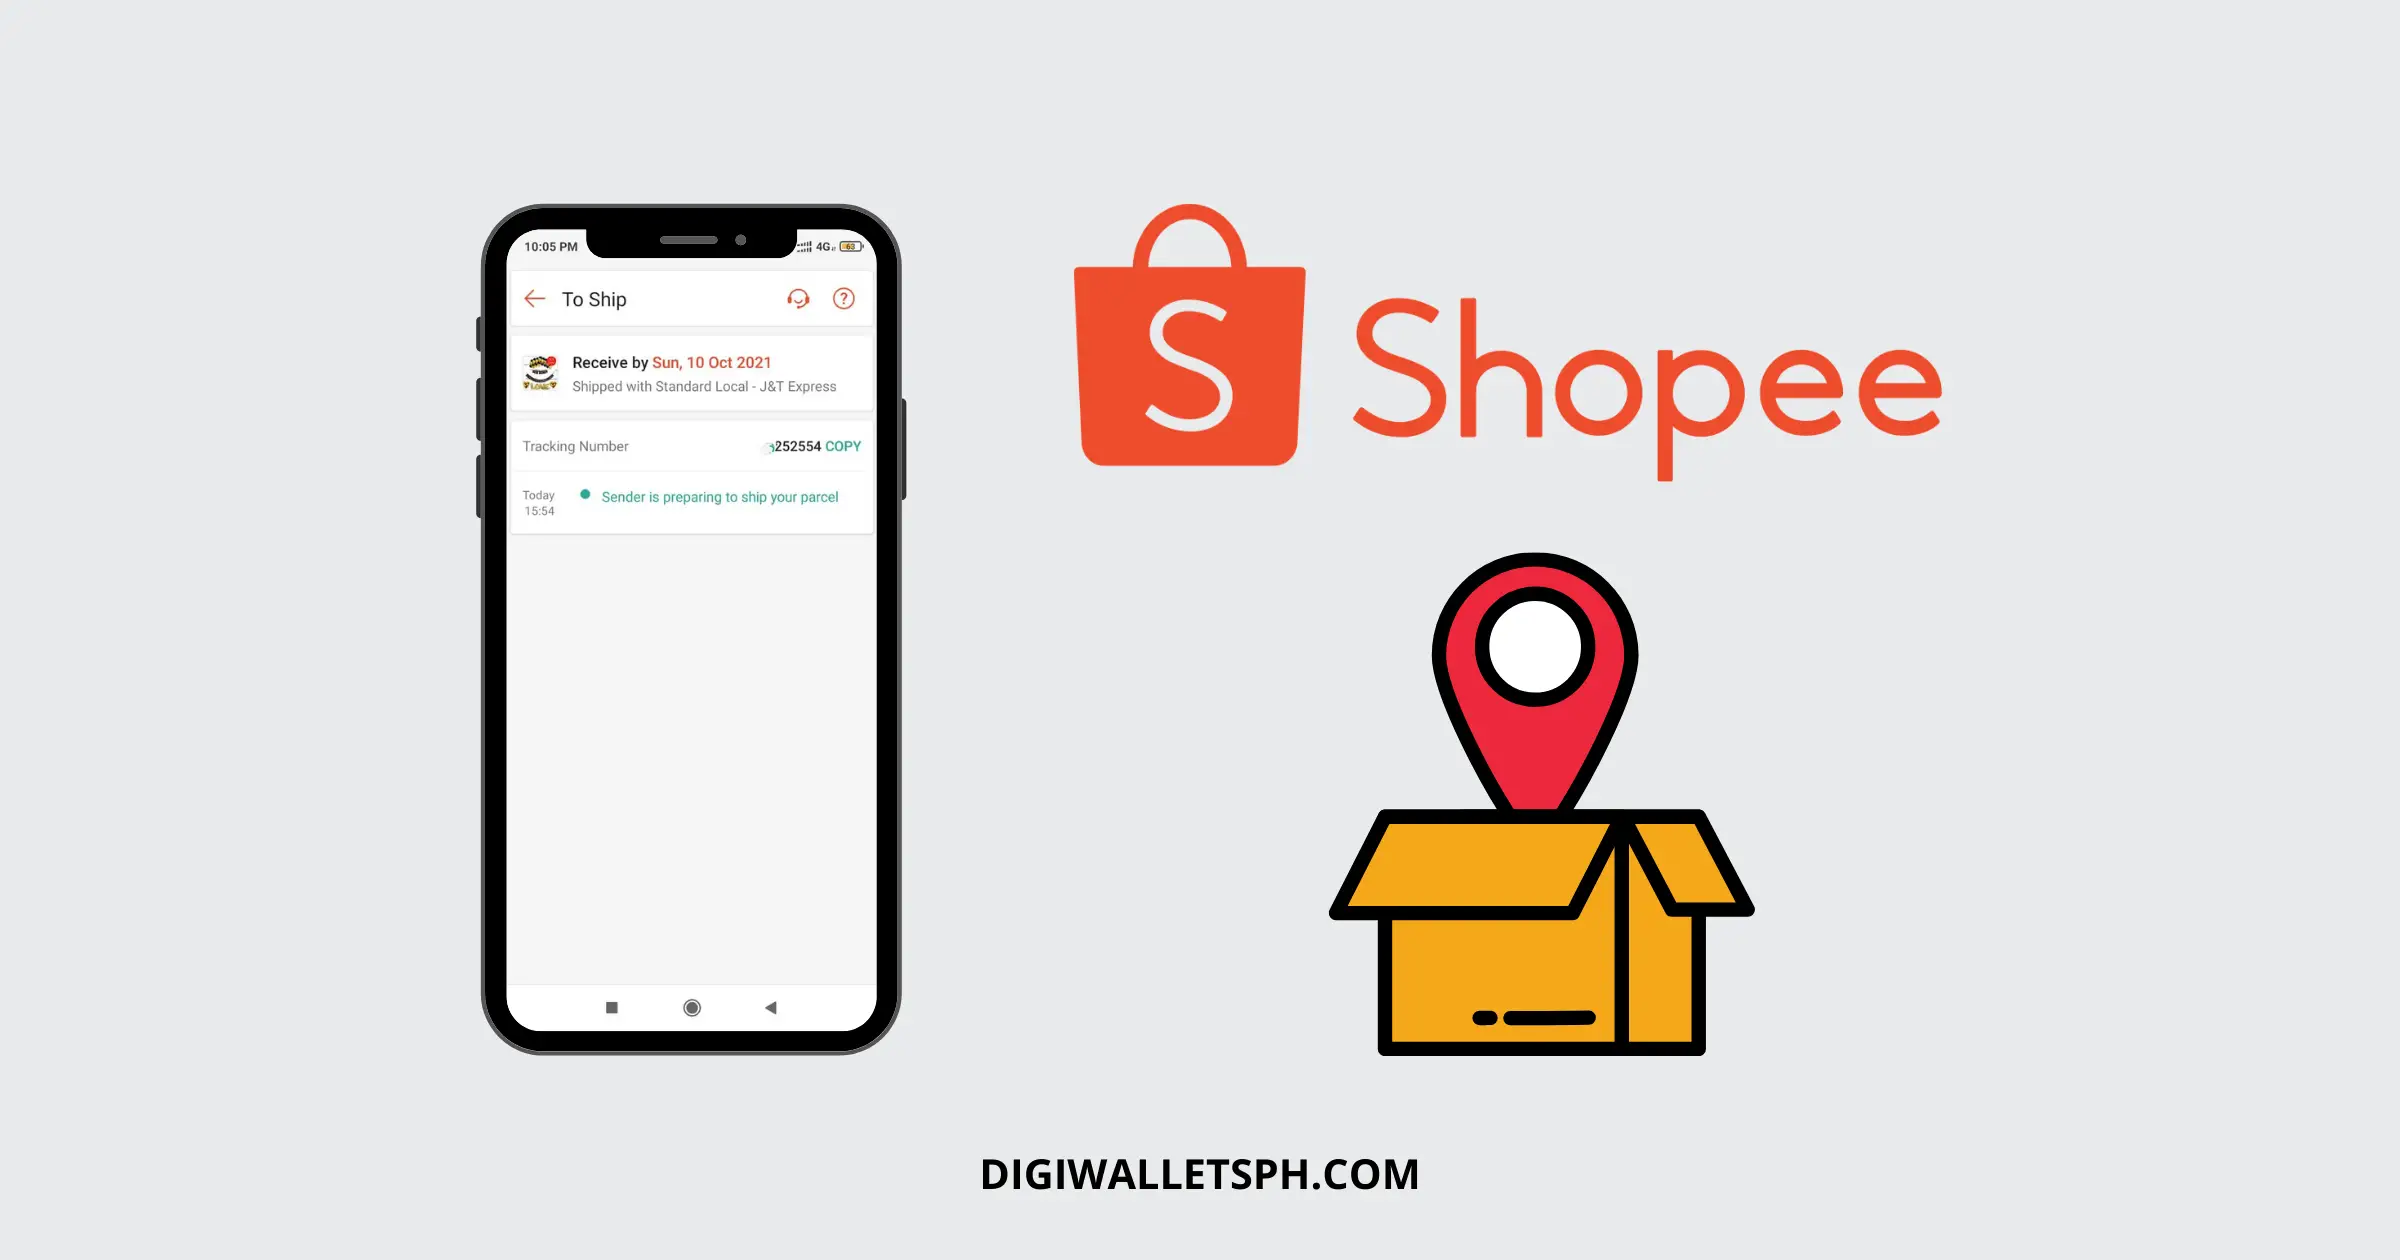 Tracking shopee expres